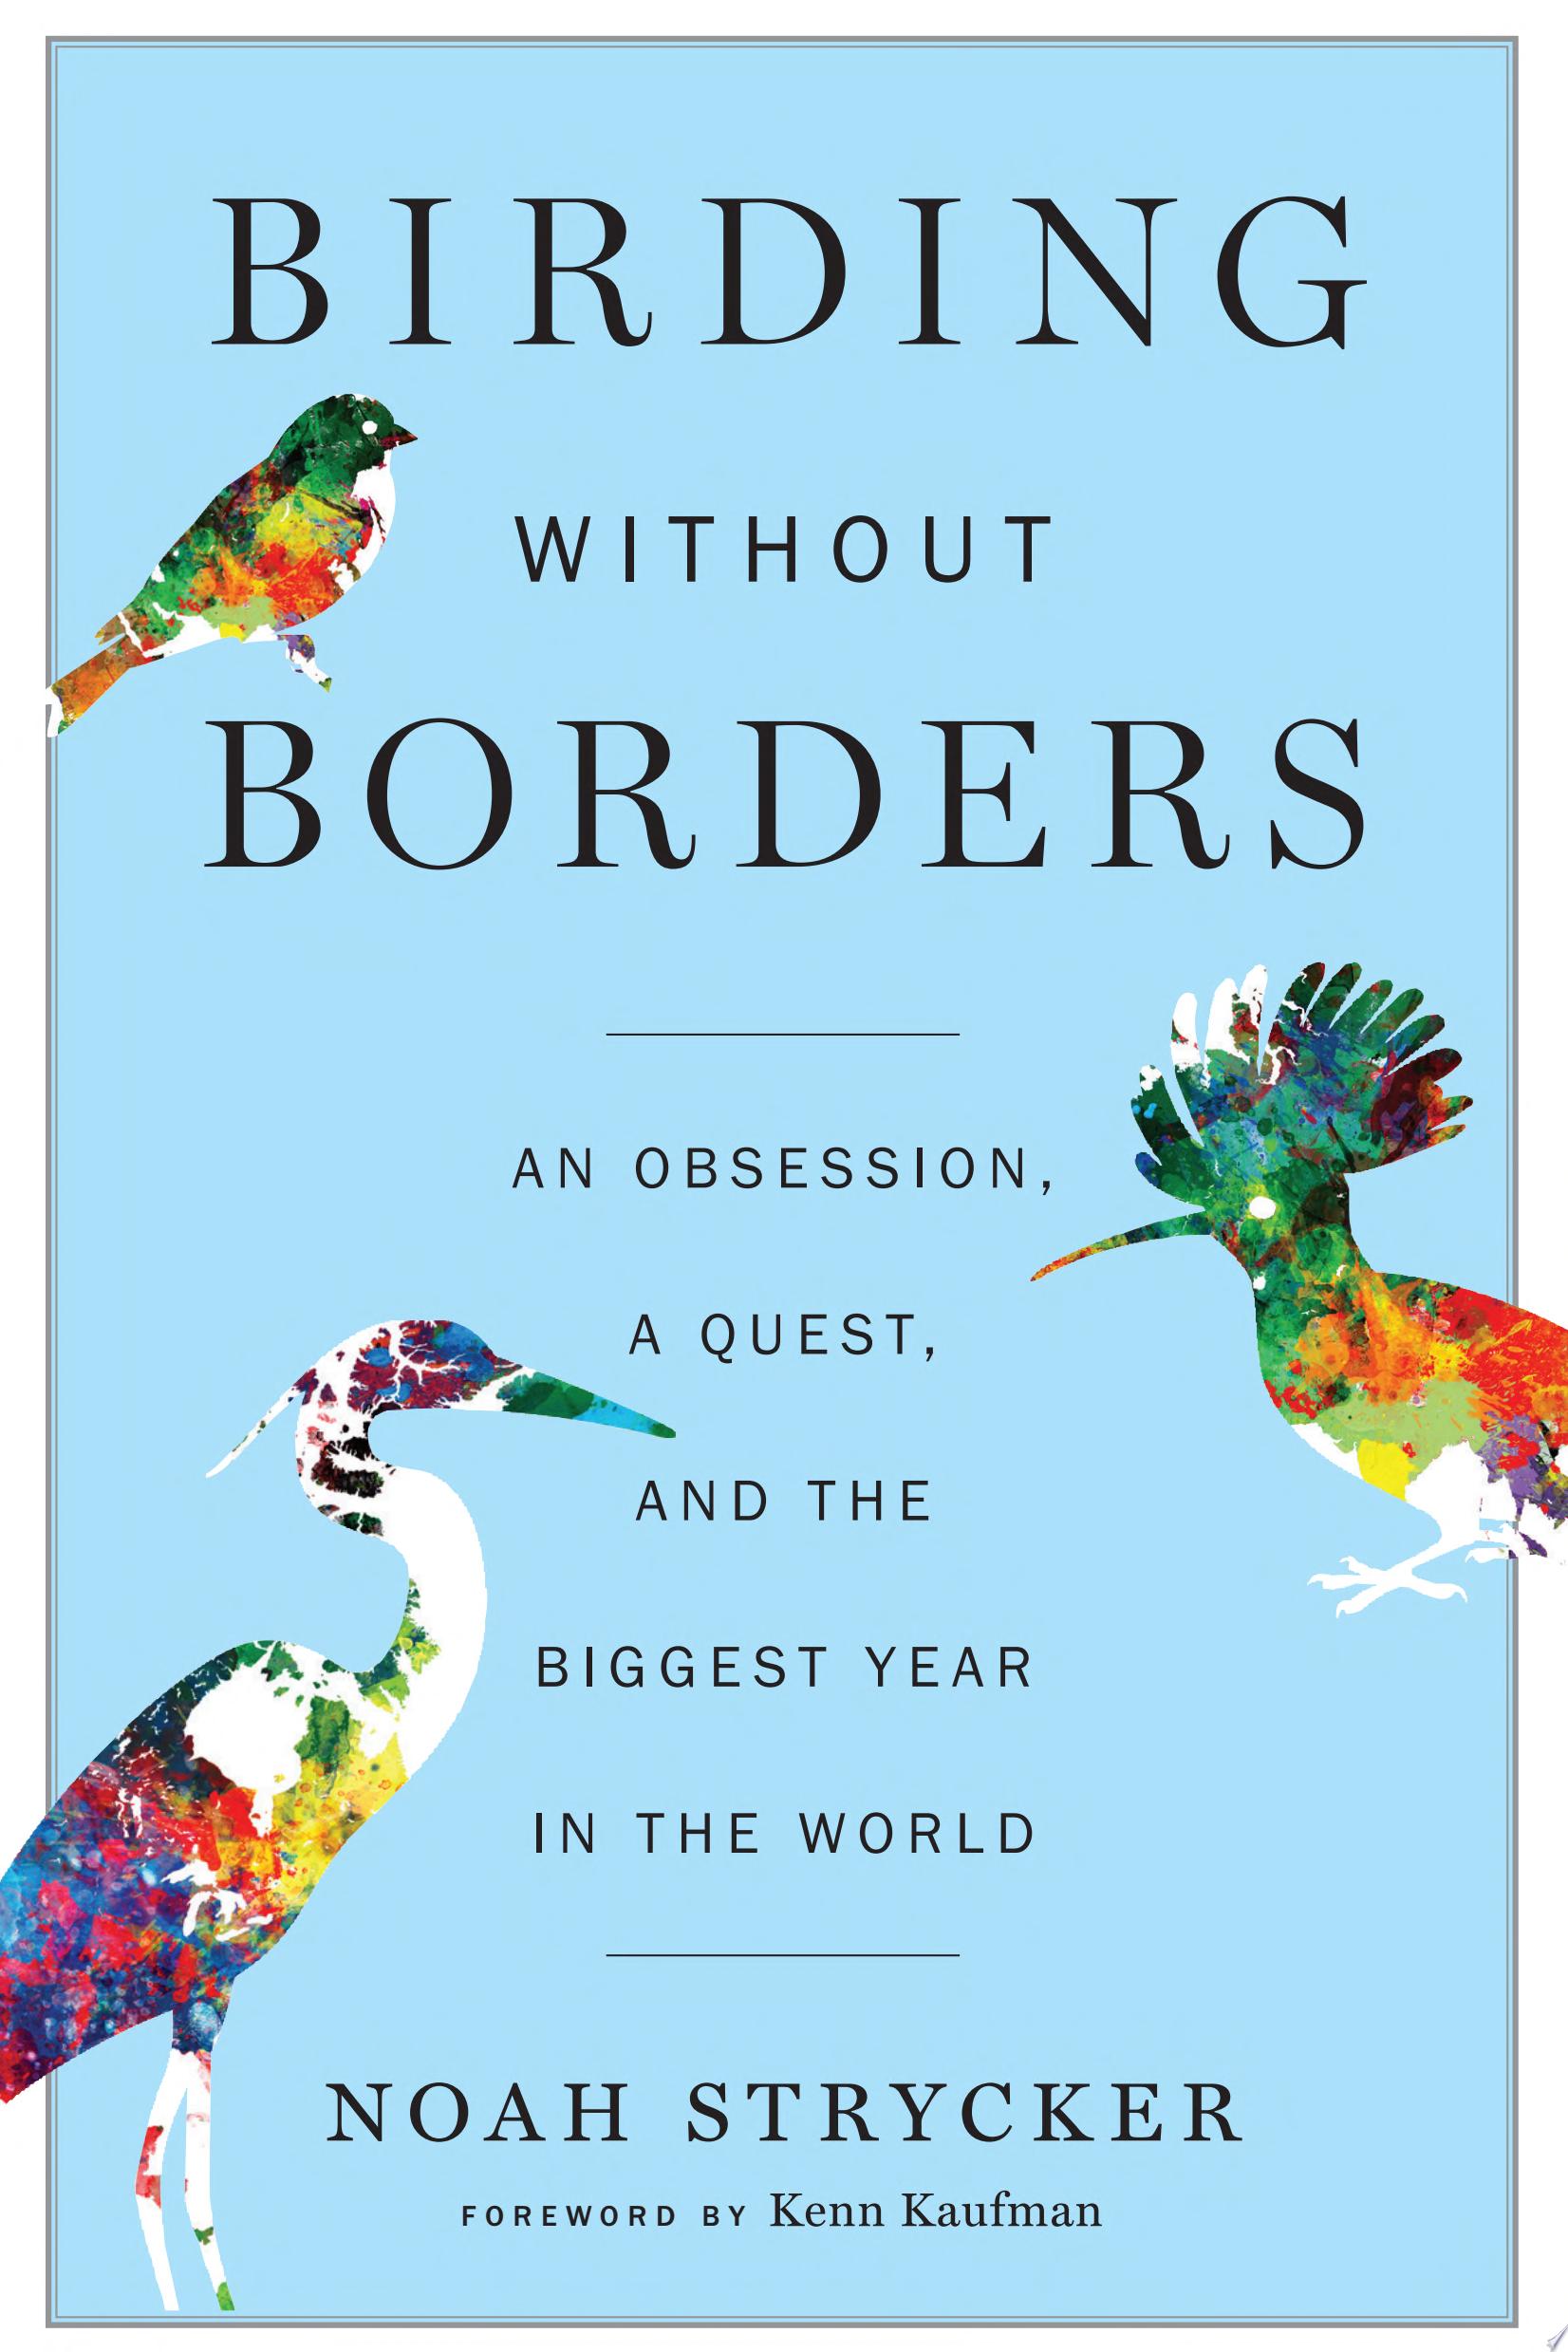 Image for "Birding Without Borders"